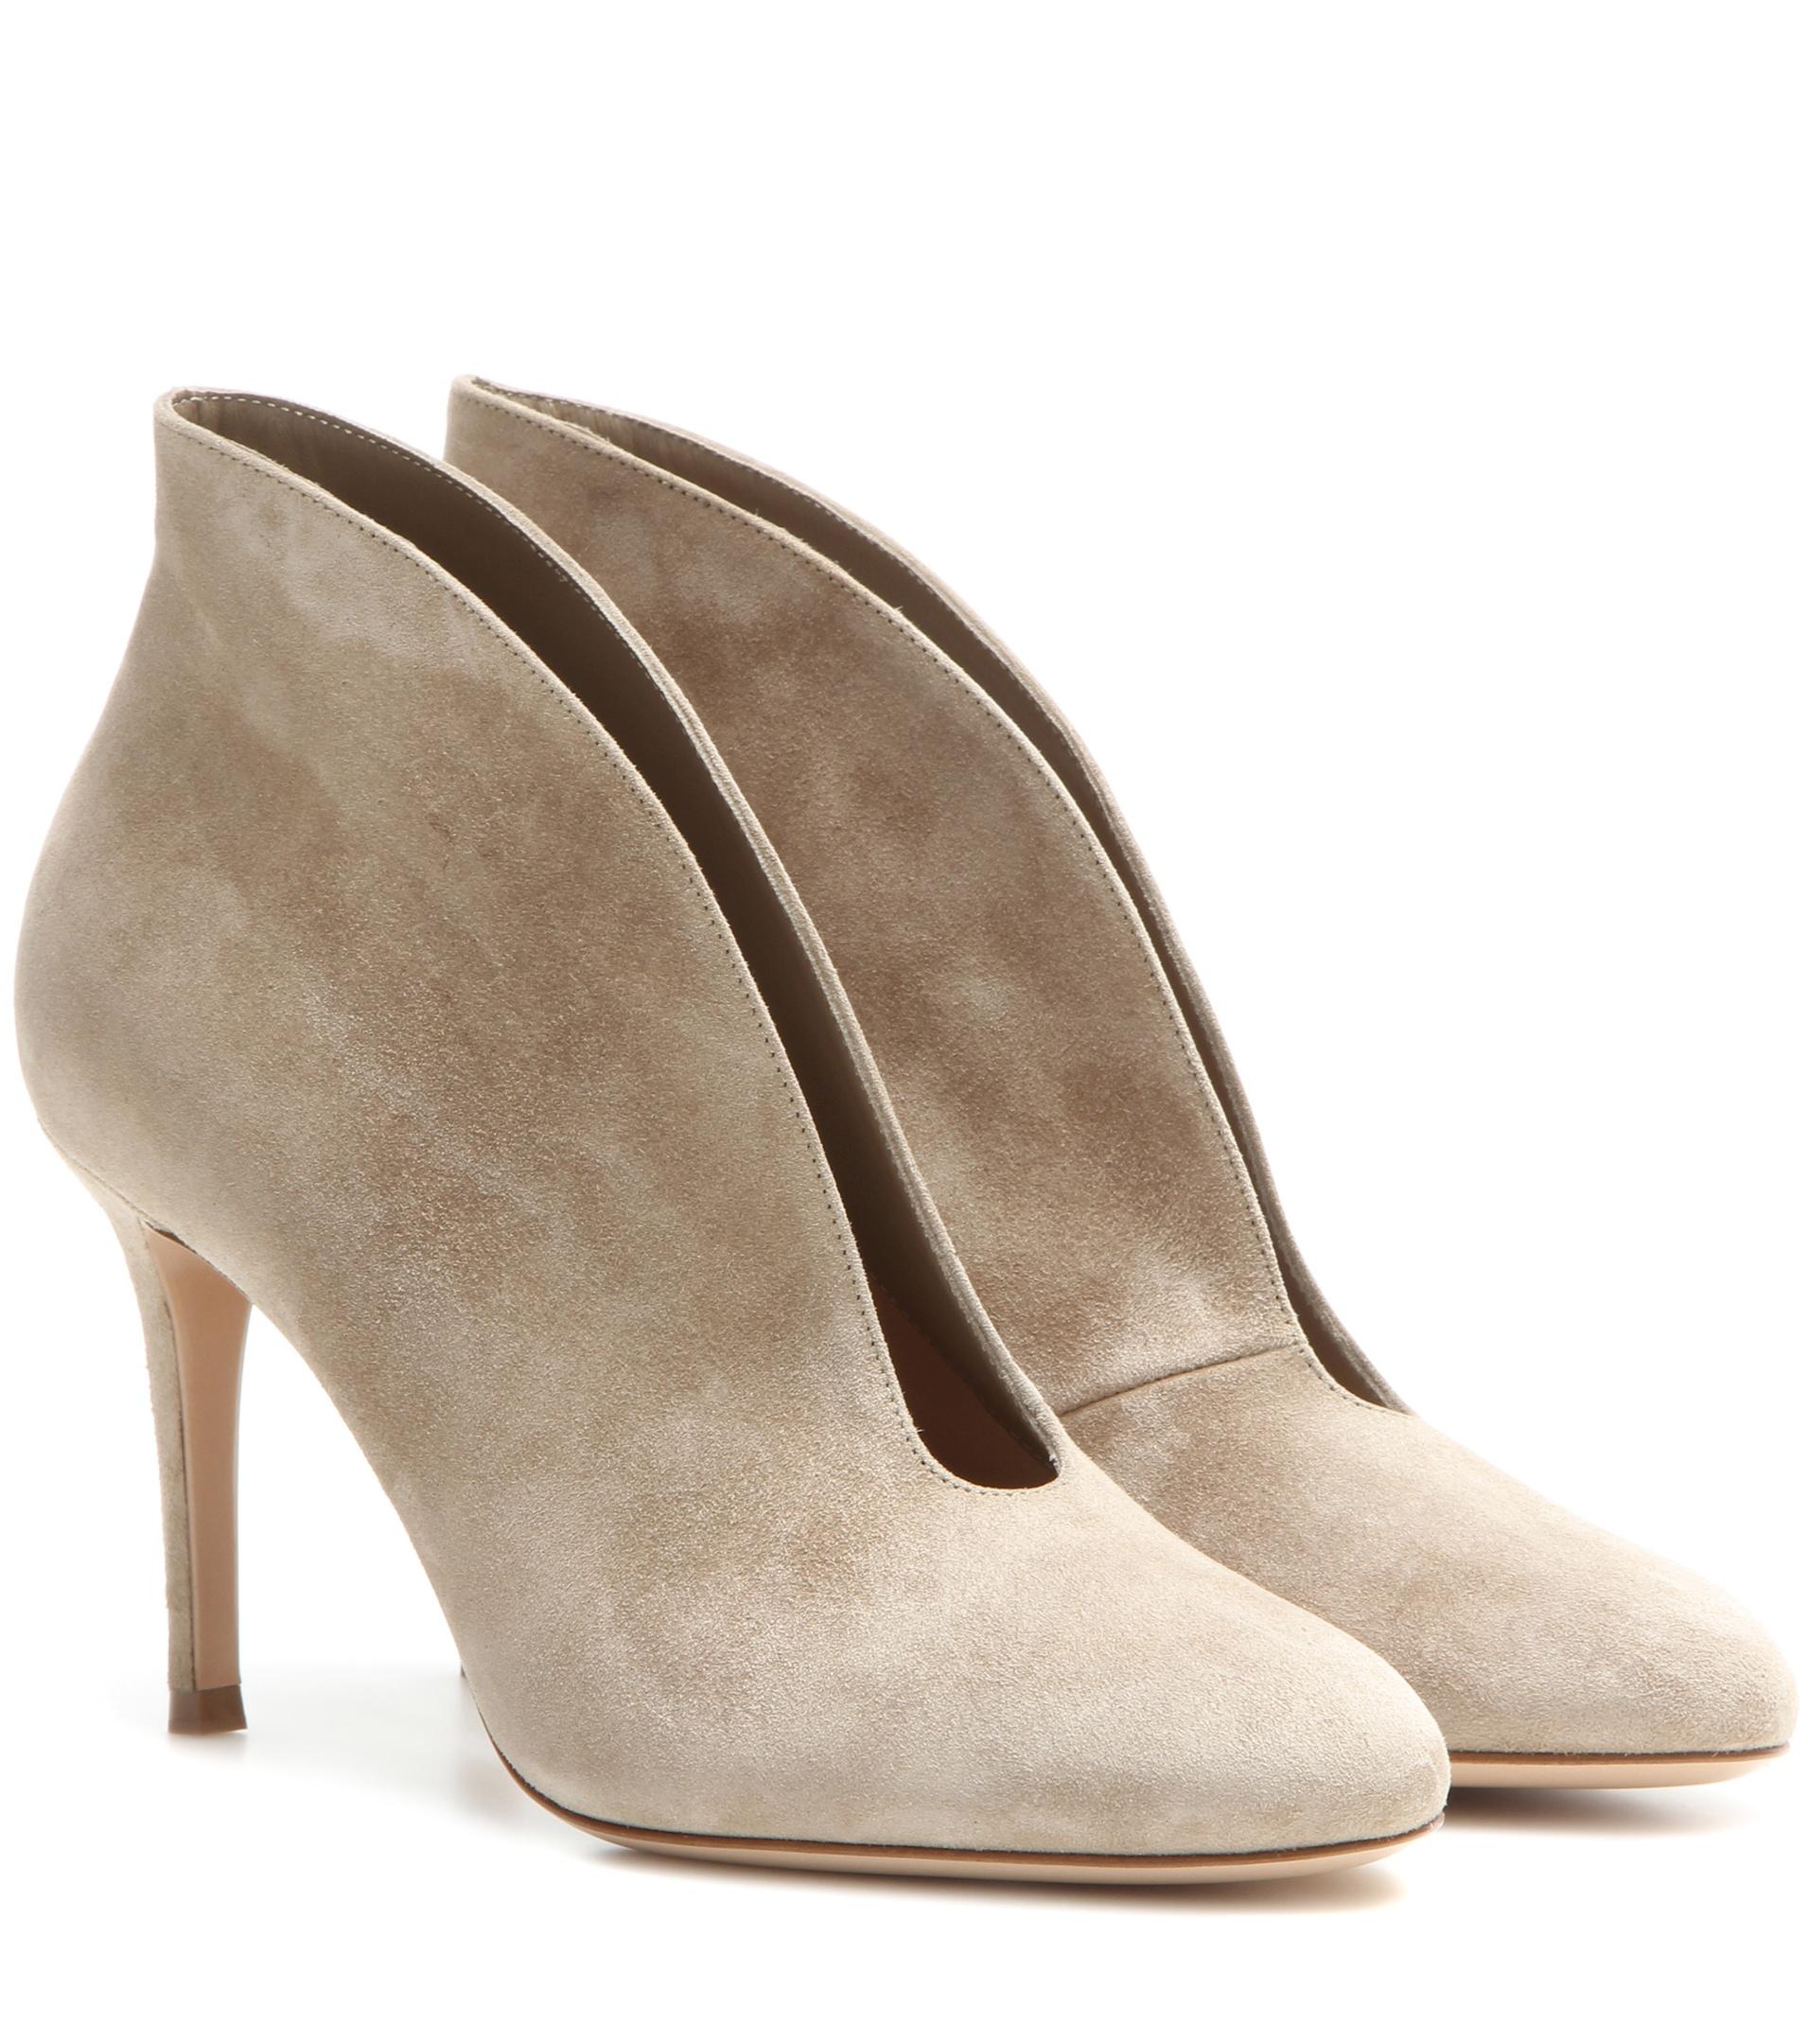 Lyst - Gianvito Rossi Exclusive To Mytheresa. Com – Vamp 85 Suede Ankle ...